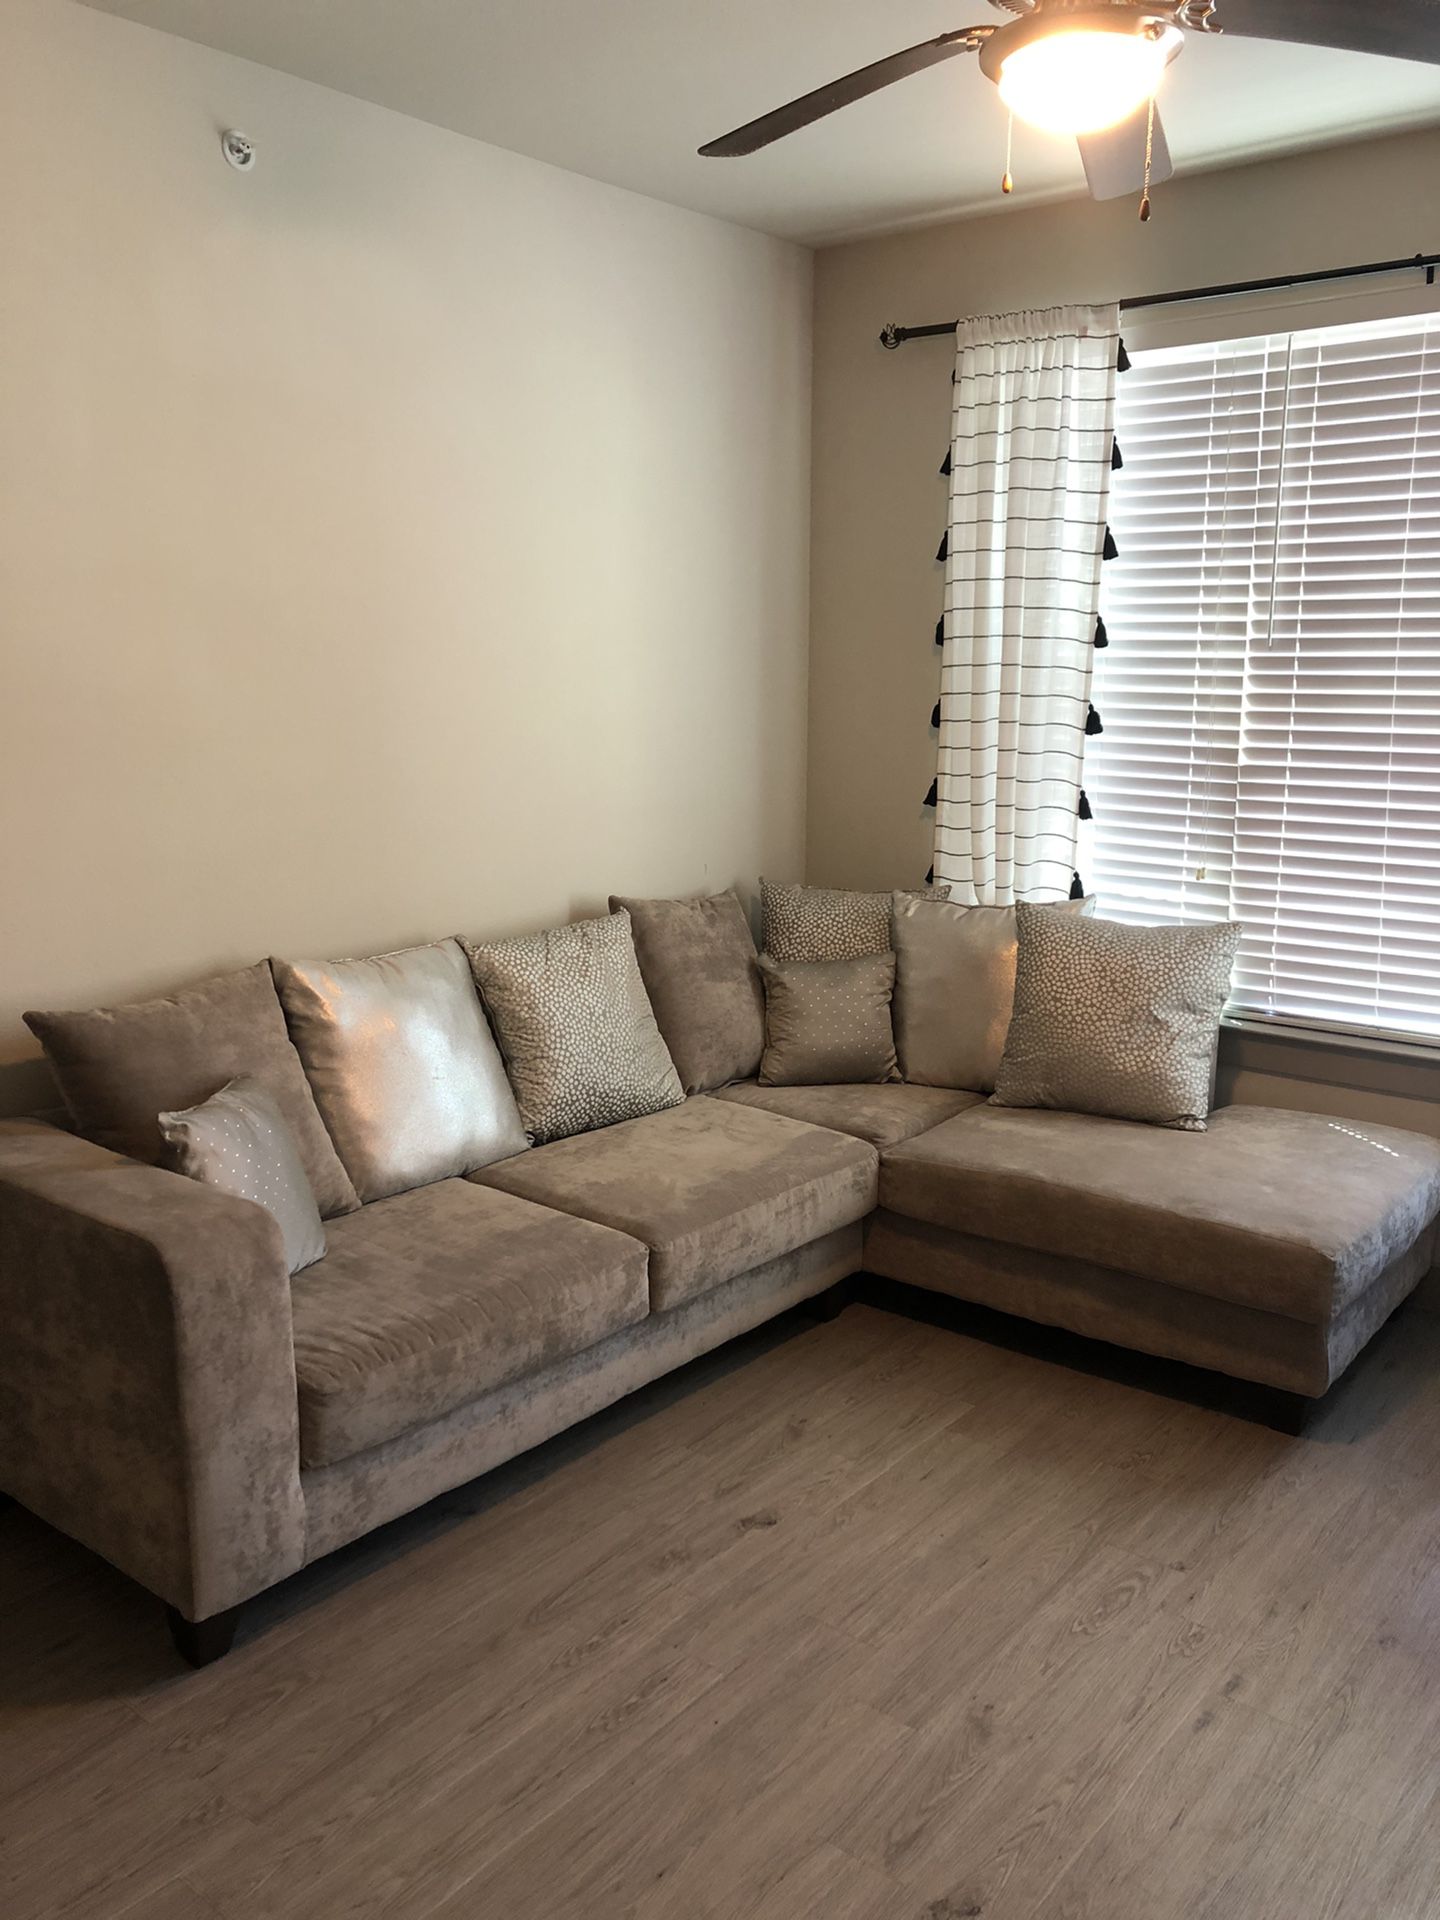 Modern sectional couch